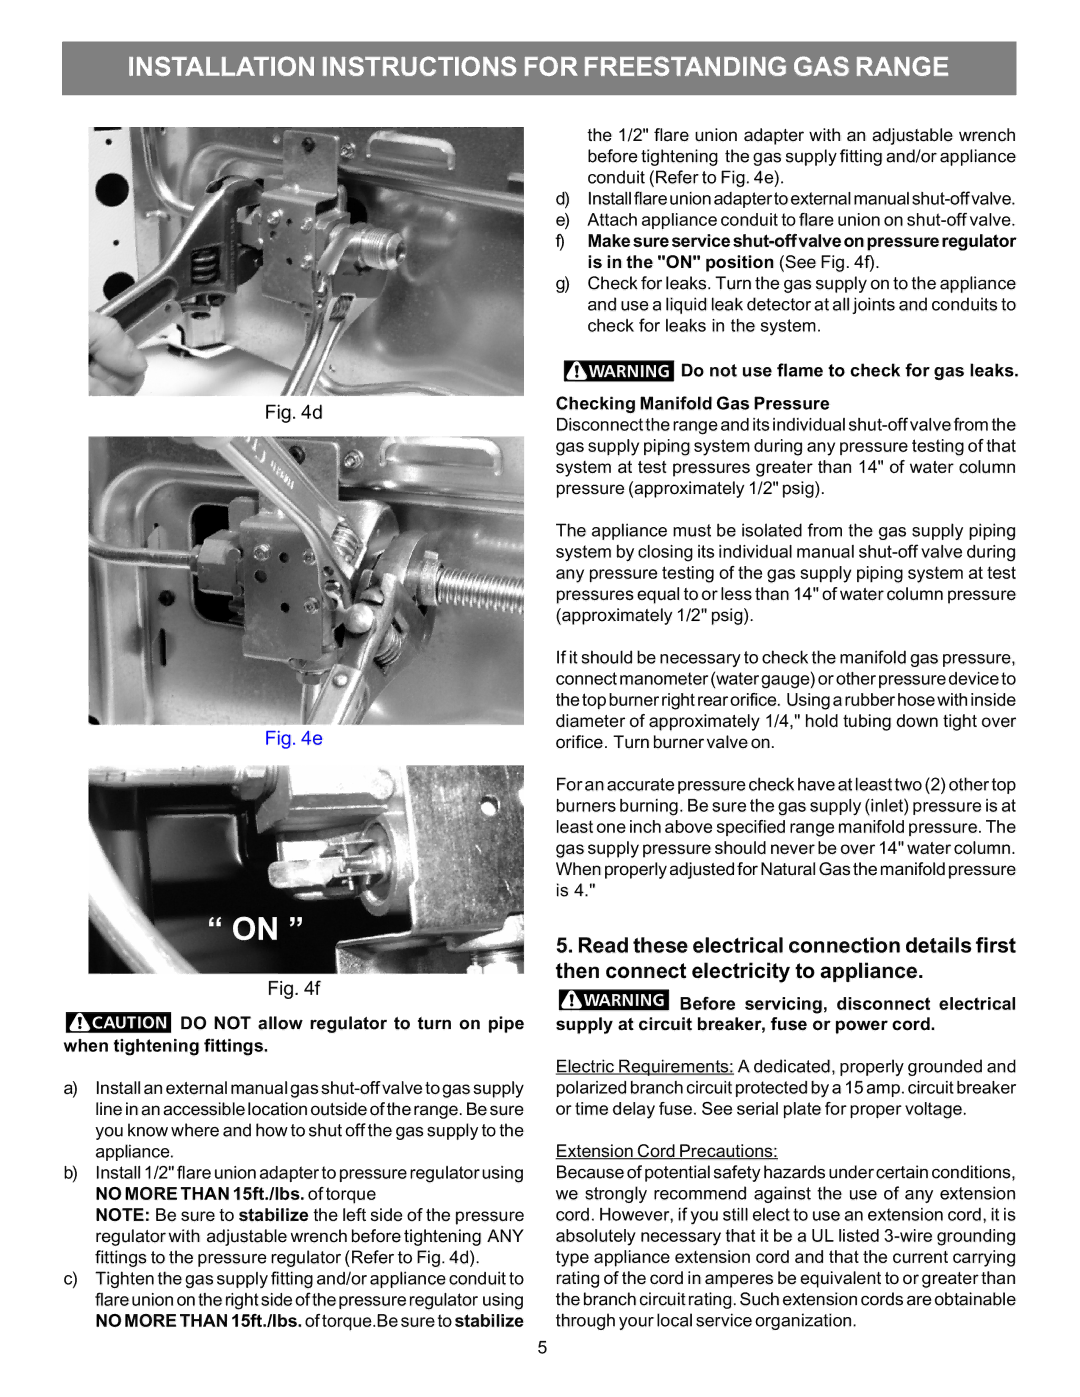 Electrolux 316469105 installation instructions Extension Cord Precautions 